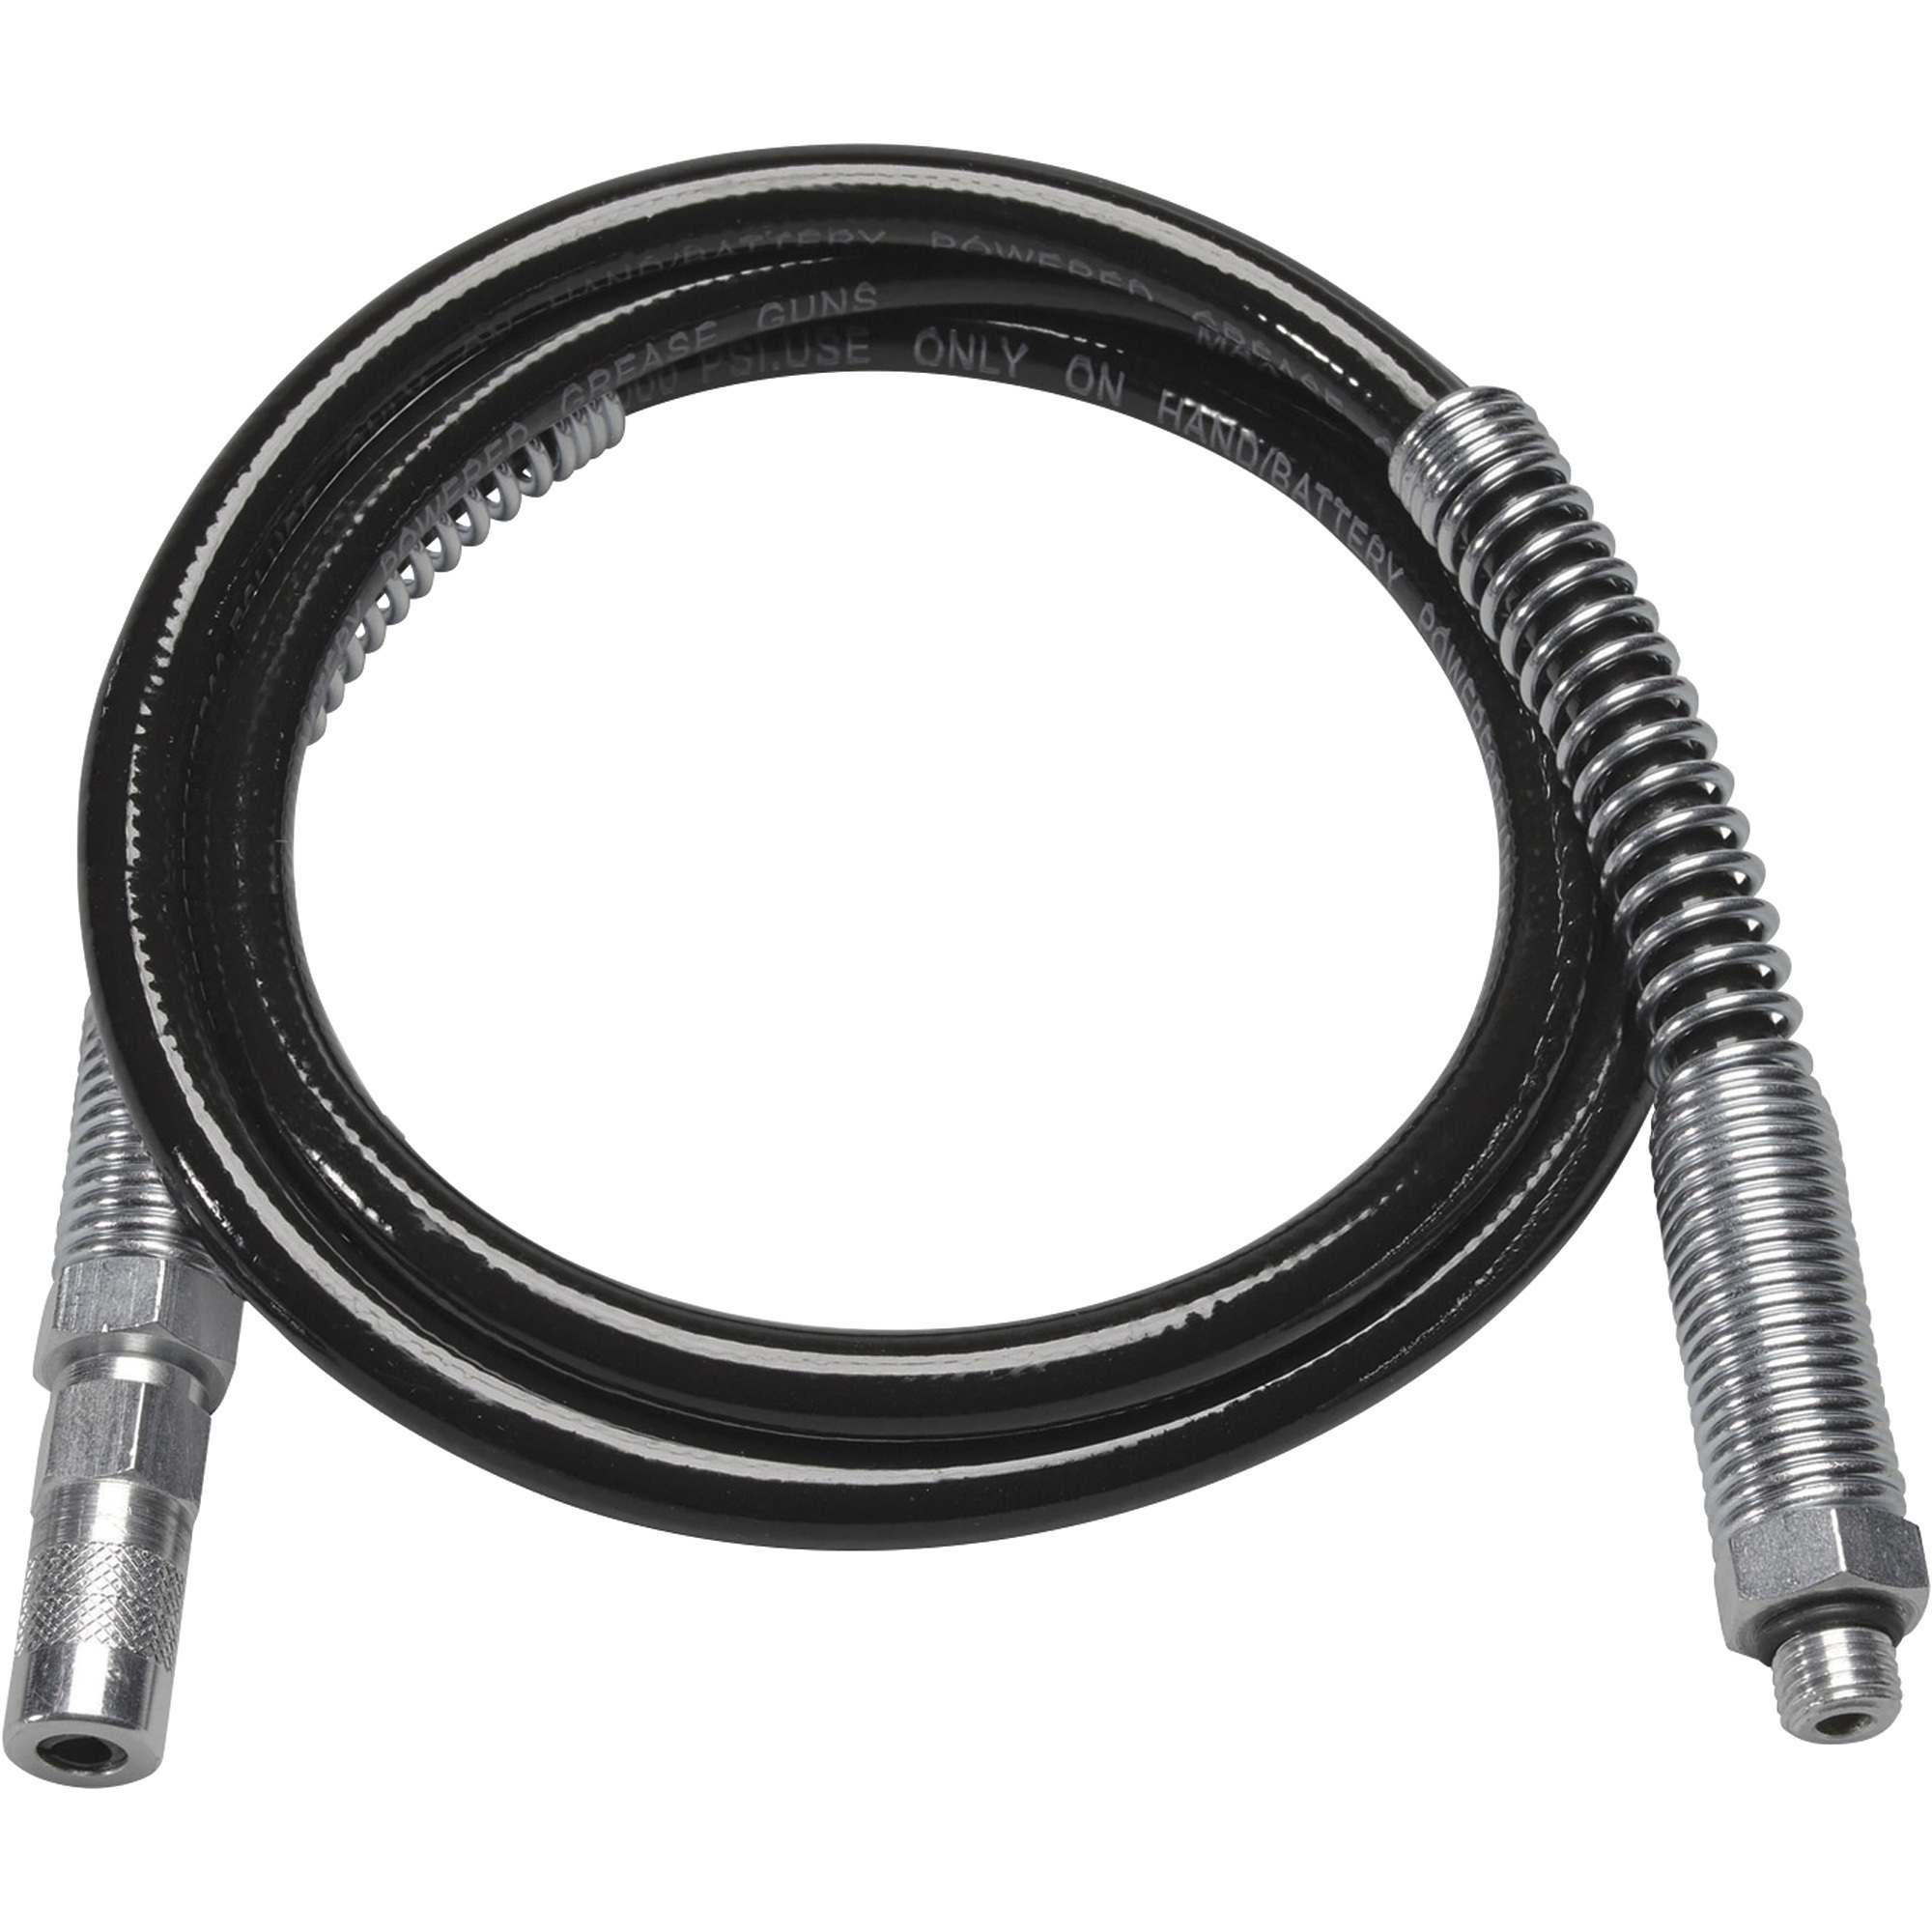 Milwaukee Grease Gun Replacement Hose with Coupler, 48Inch L, Model 49-16-2647